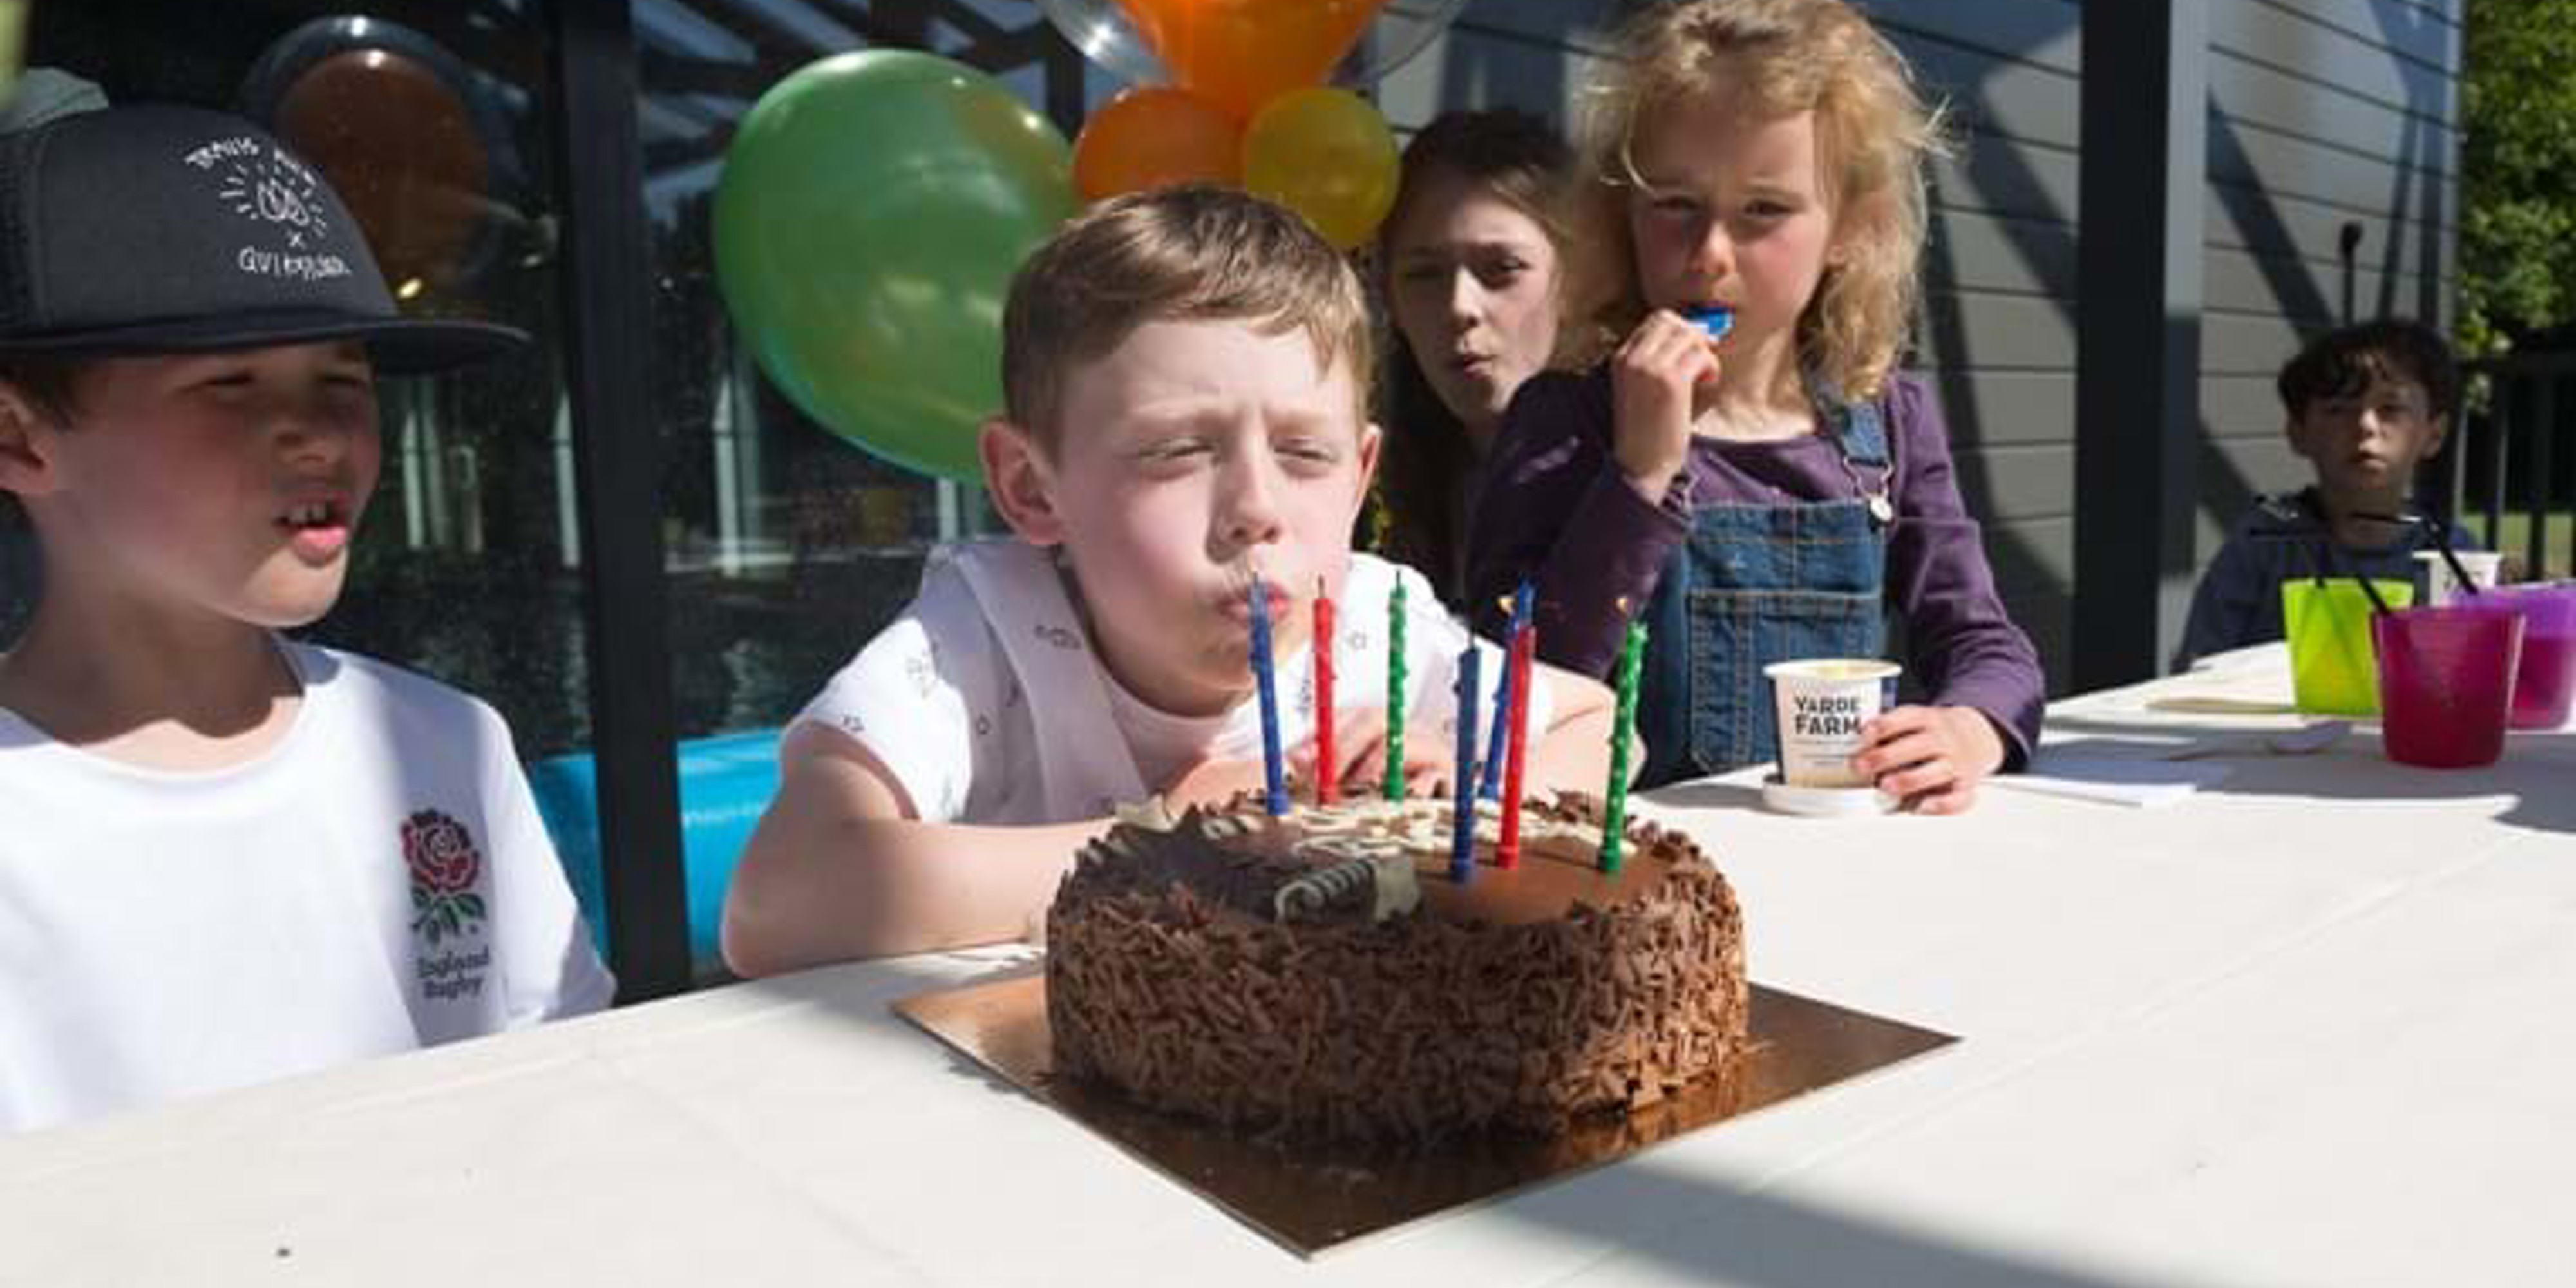 Boy blowing out his candles